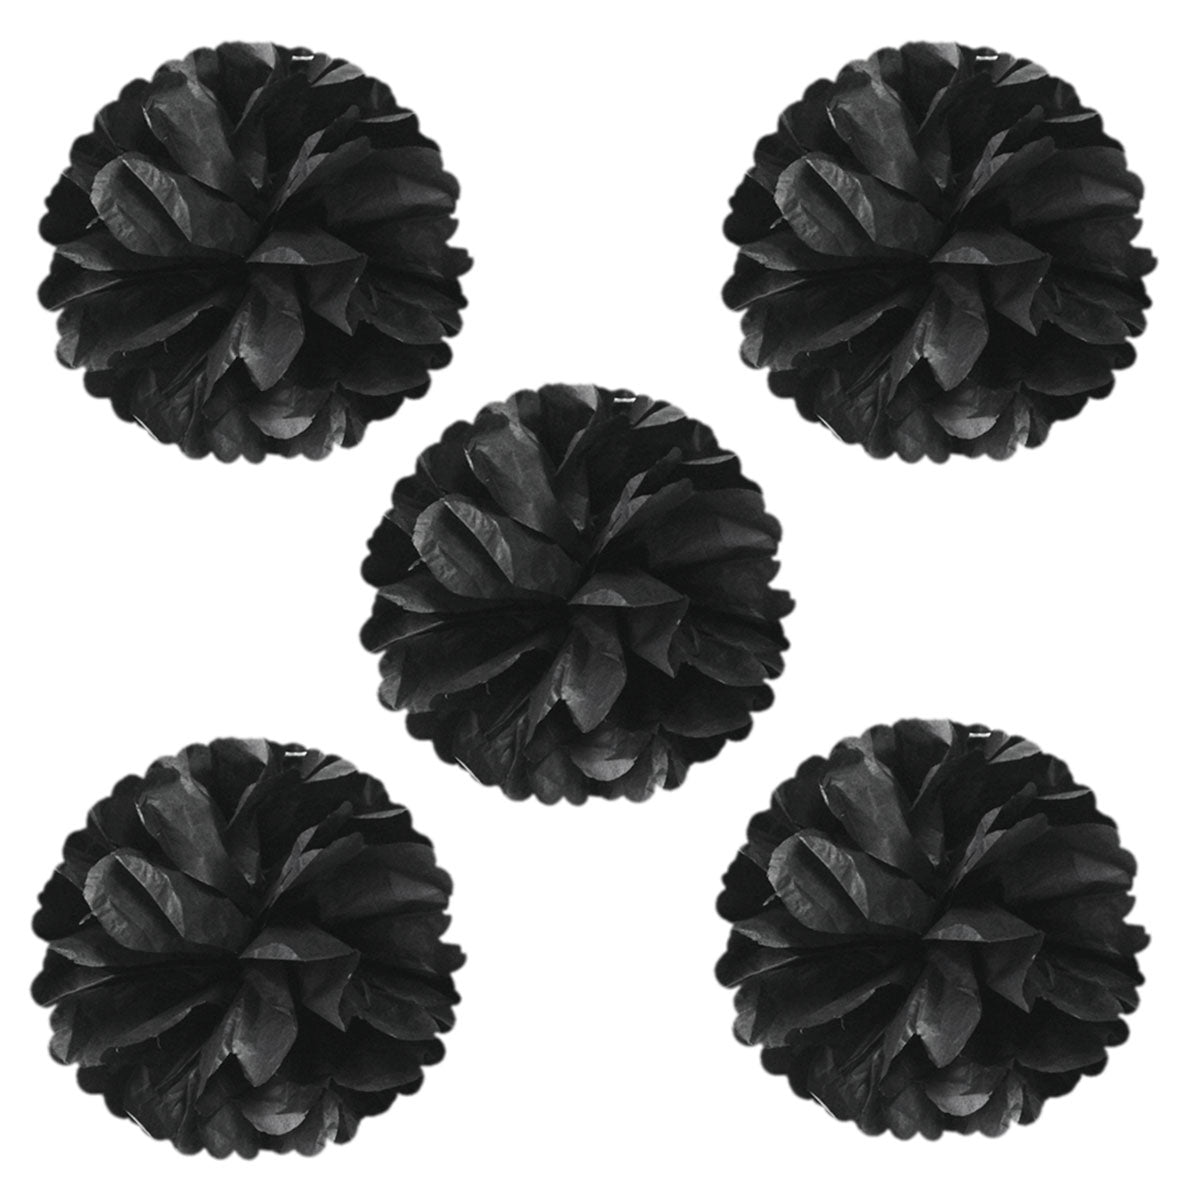 Wrapables Set of 9 Tissue Pom Pom Party Decorations for Weddings, Birthday Parties Baby Showers and Nursery Decor, Black/Silver/White